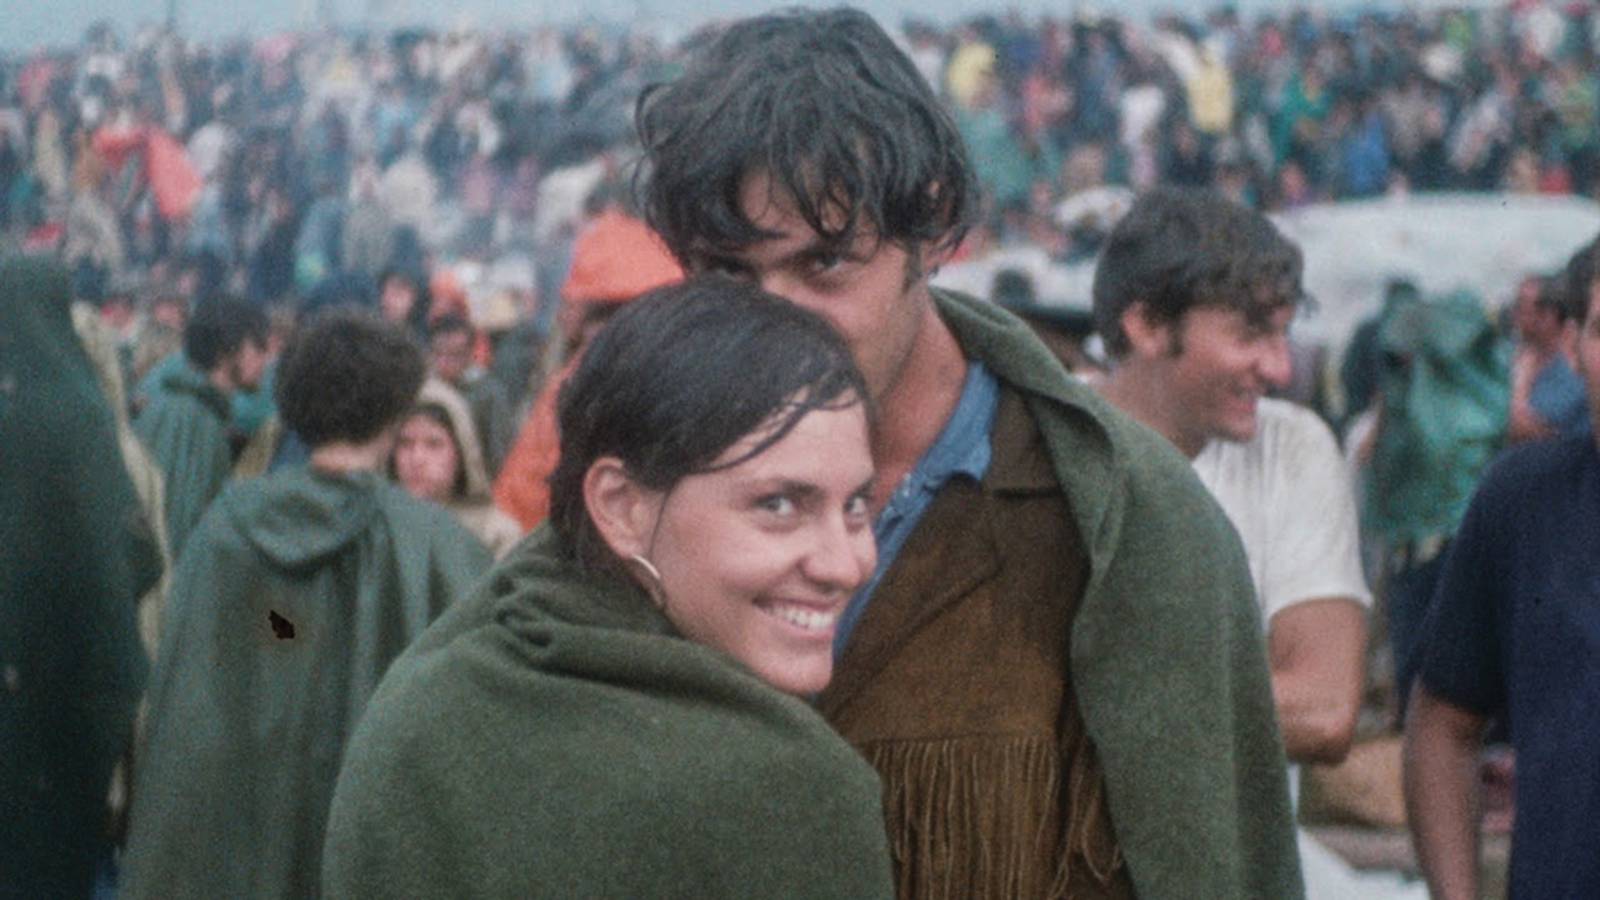 Woodstock Three Days That Defined A Generation Review Santa Fe Reporter